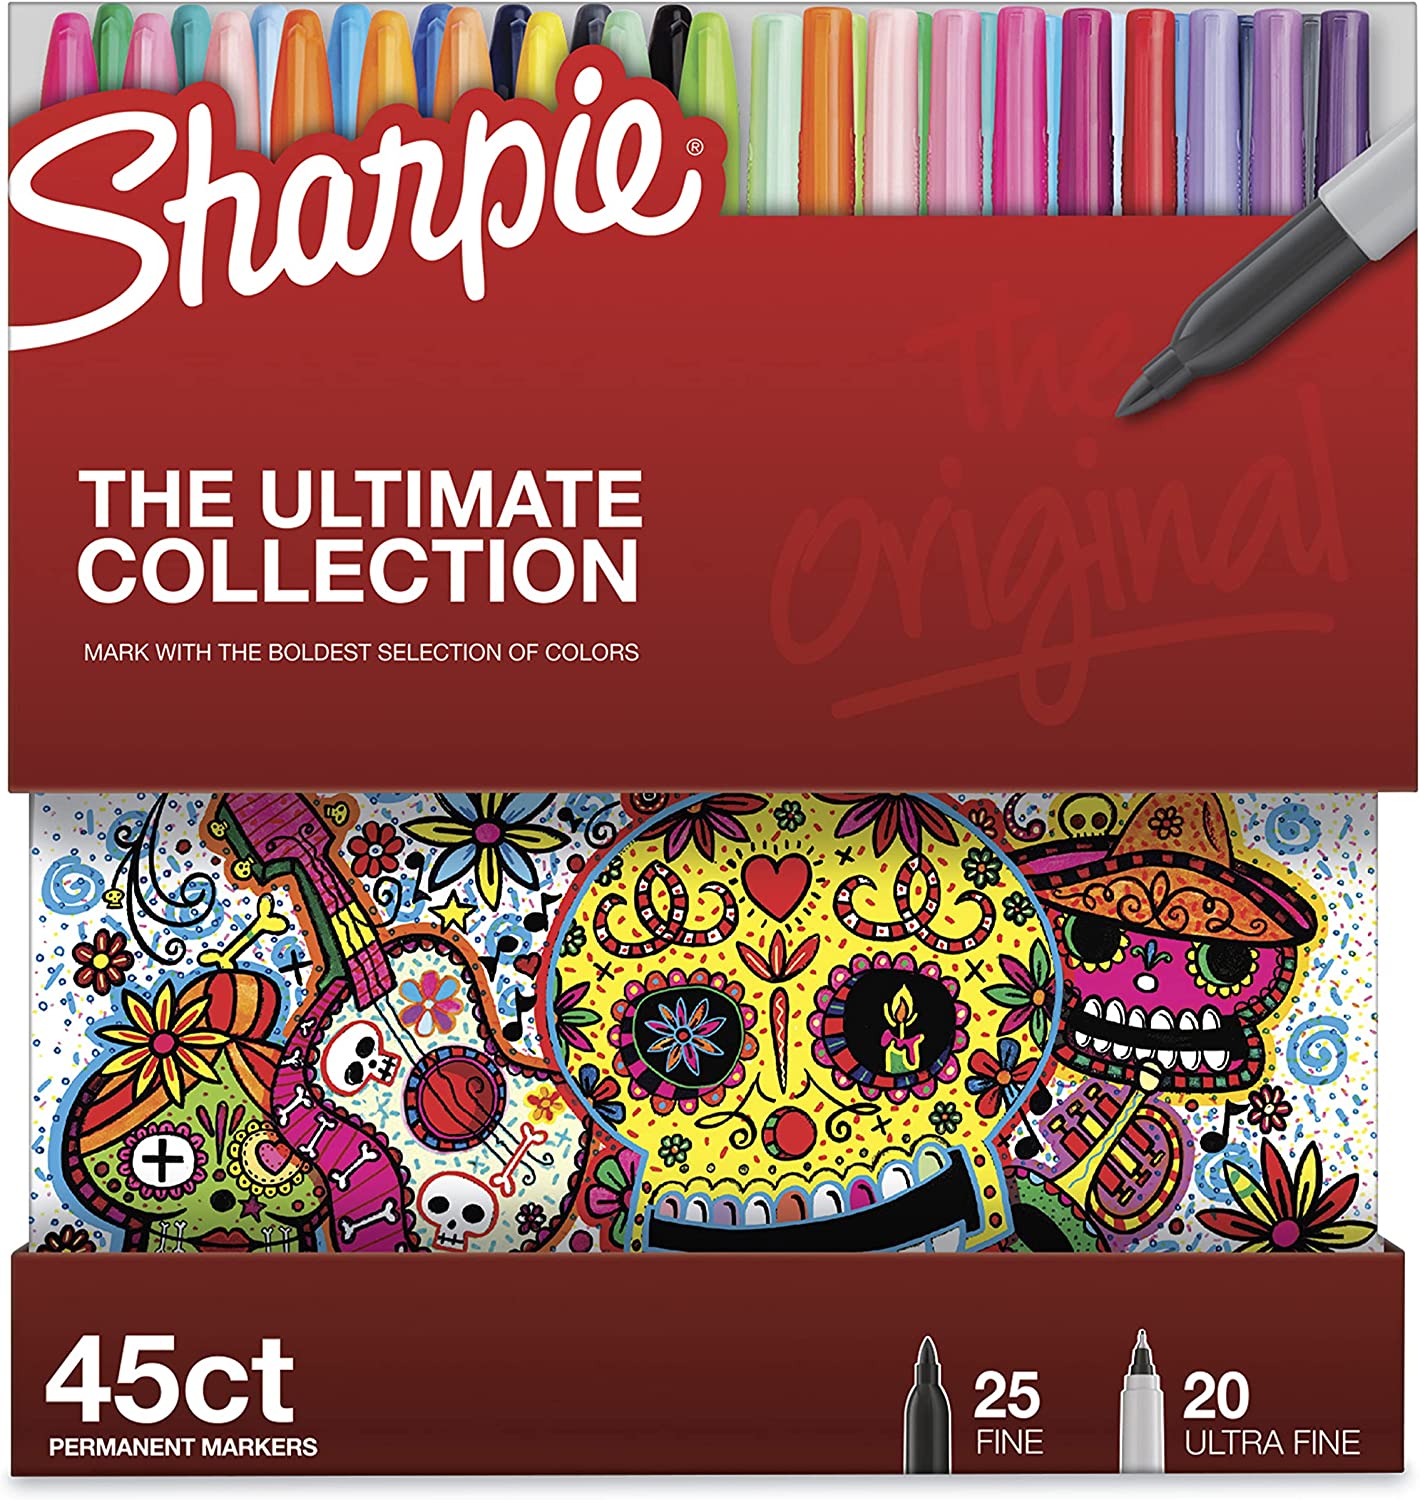 Sharpie Permanent Markers Ultimate Collection - 115 count